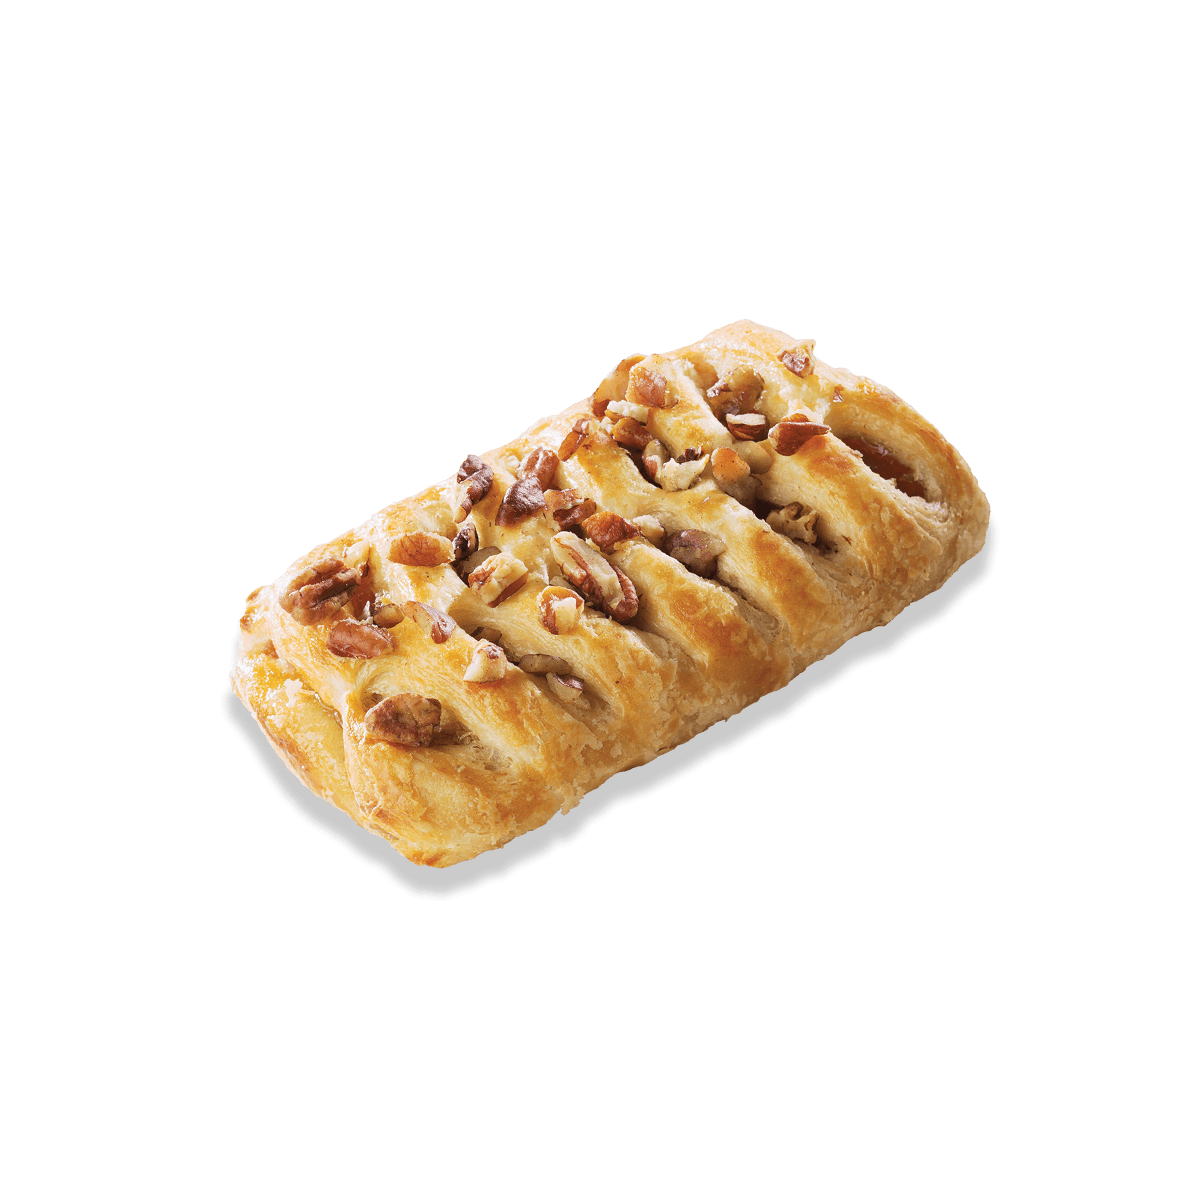 maple pecan butter danish on the side